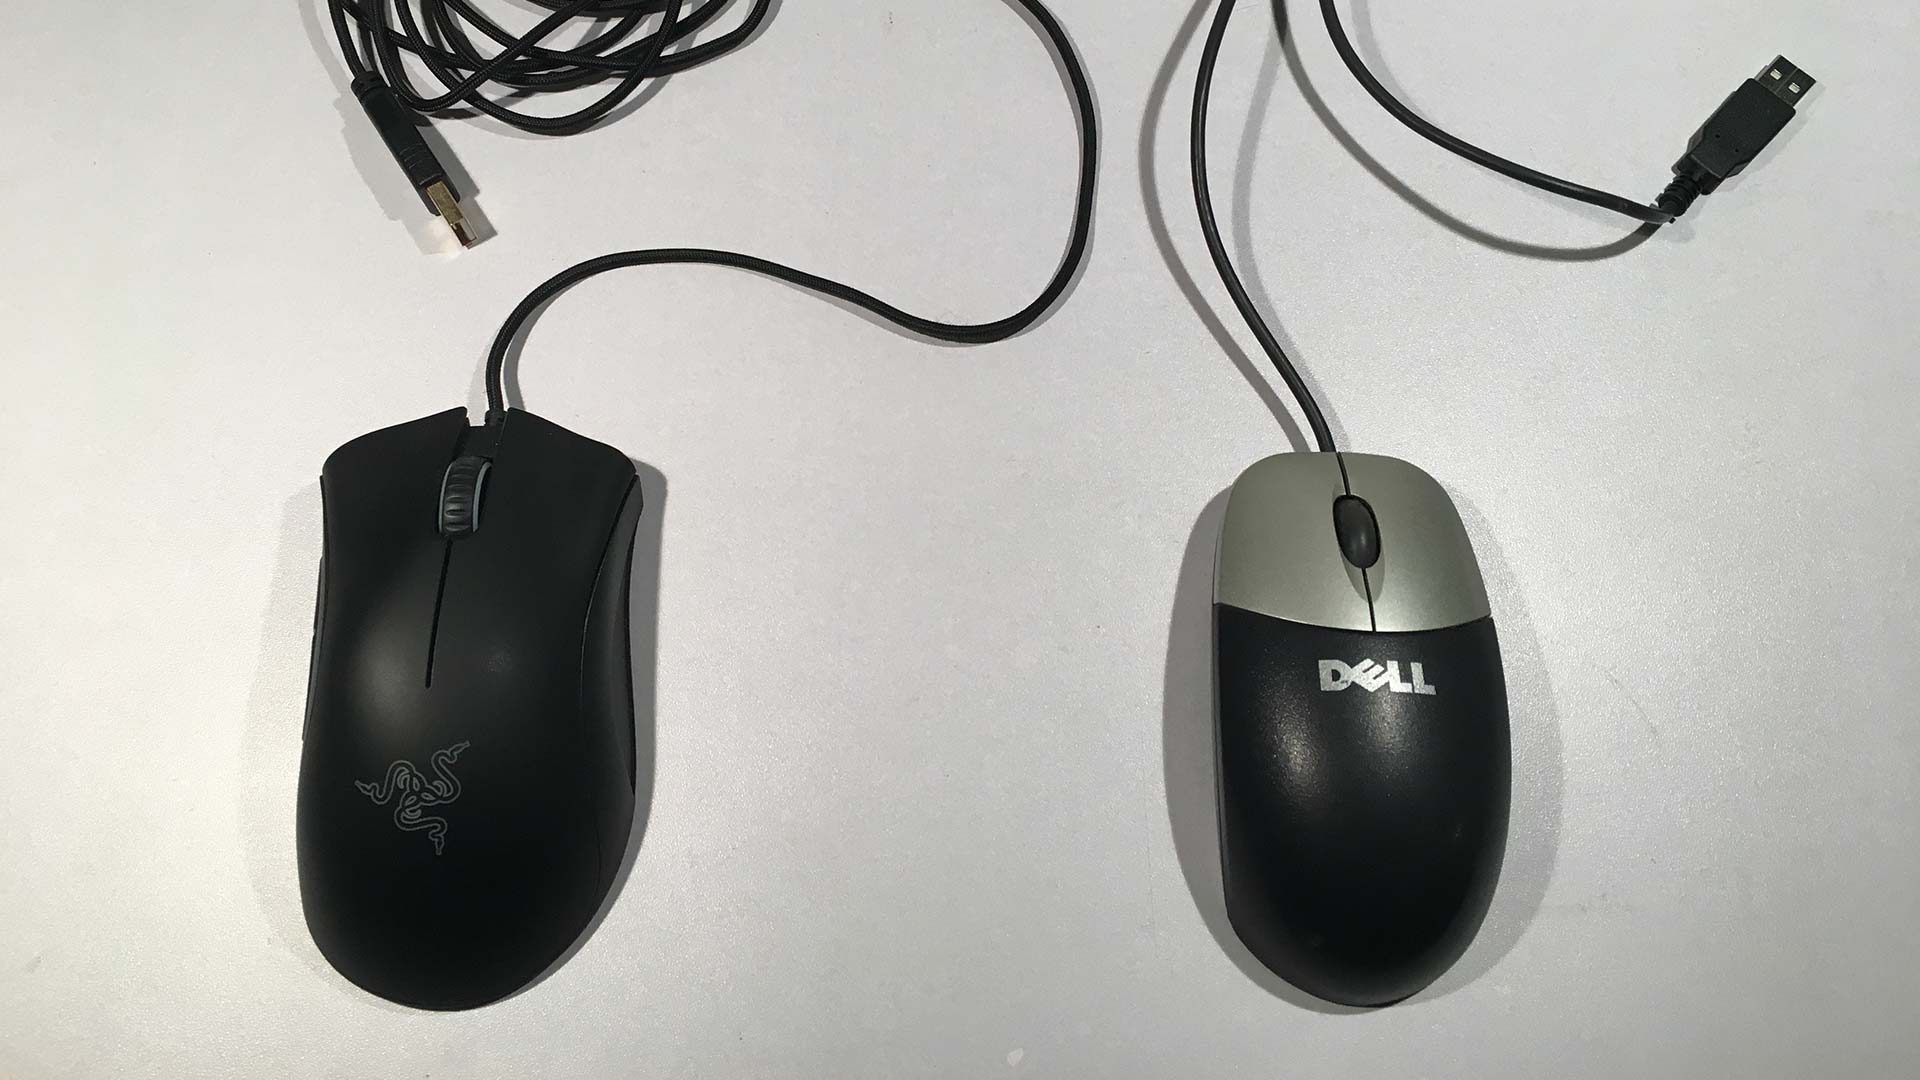 Lets begin the repair by using a much cheaper mouse!